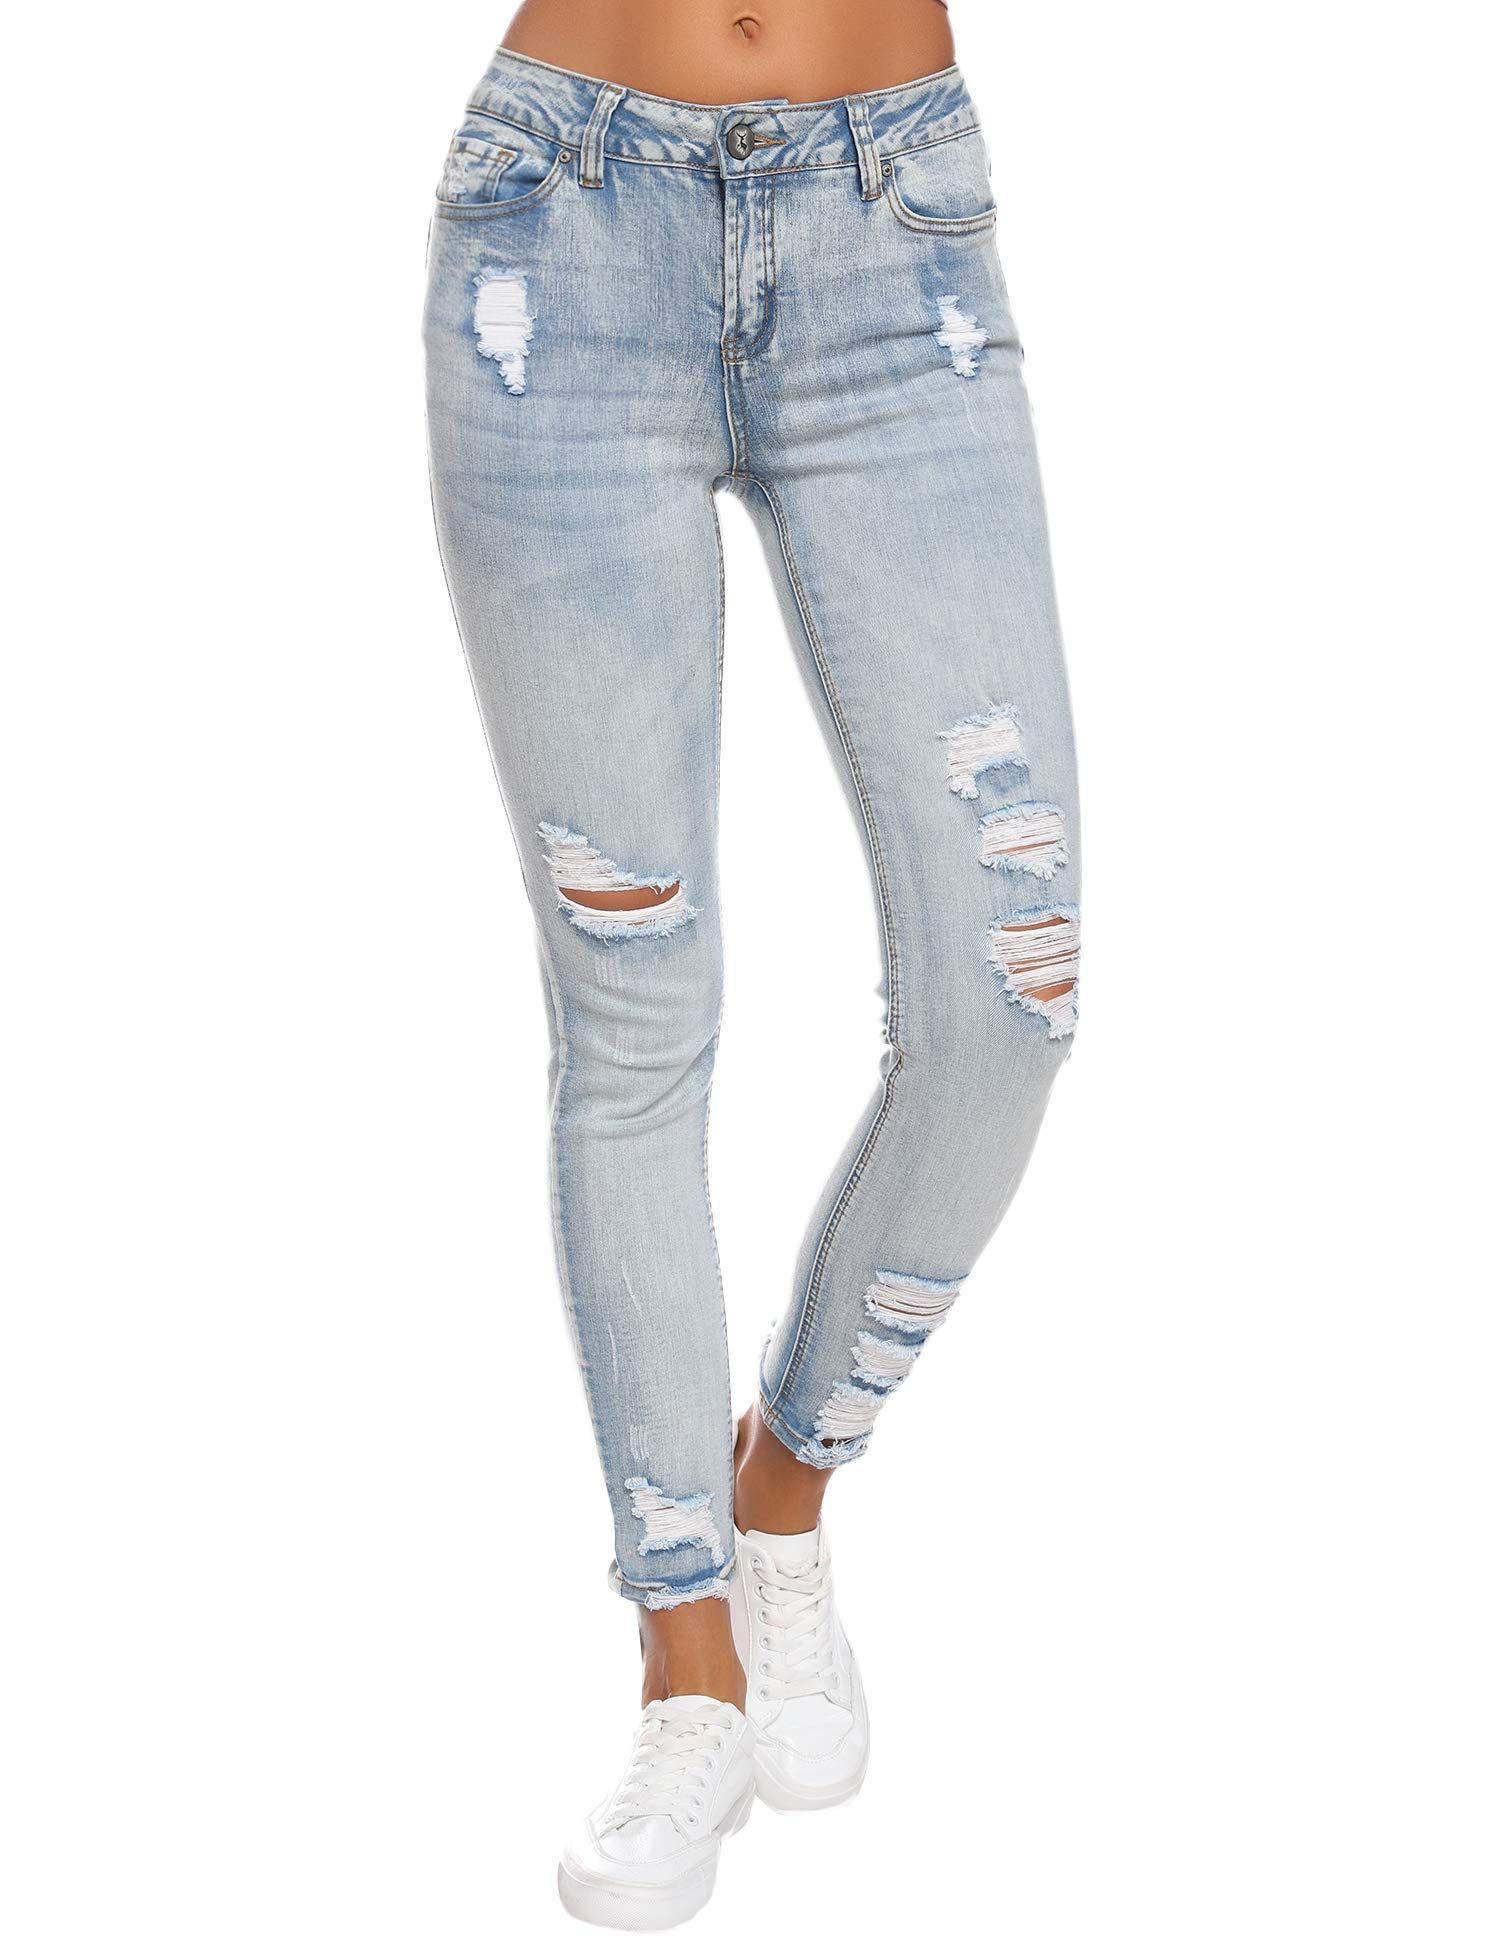 Resfeber Women's Ripped Boyfriend Jeans Cute Distressed Jeans Stretch Skinny Jeans with Hole | Amazon (US)